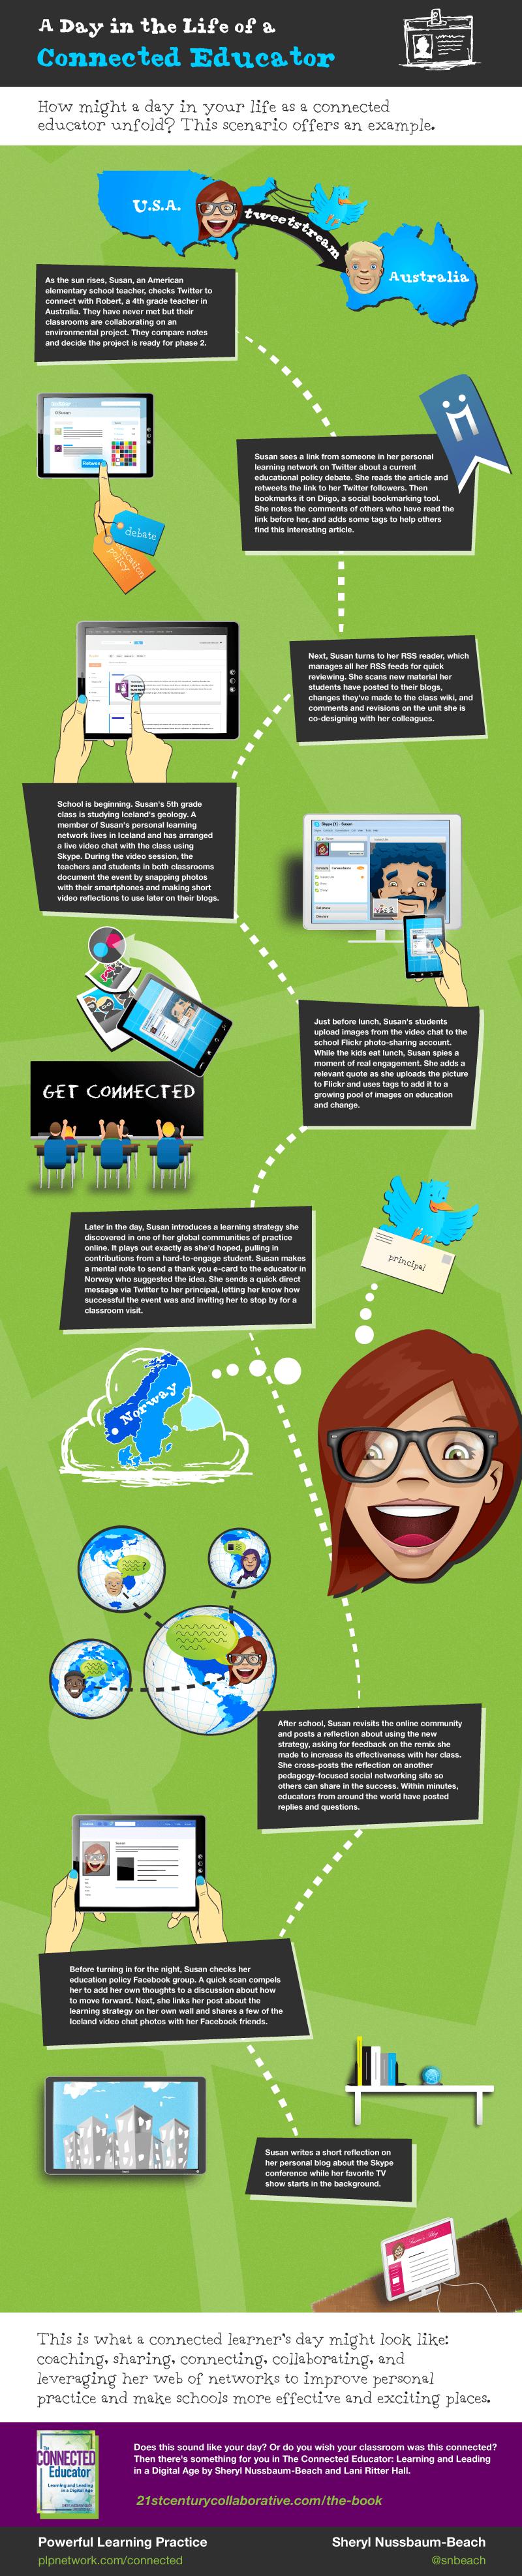 A Day in the Life of a 21st Century Connected Teacher Infographic